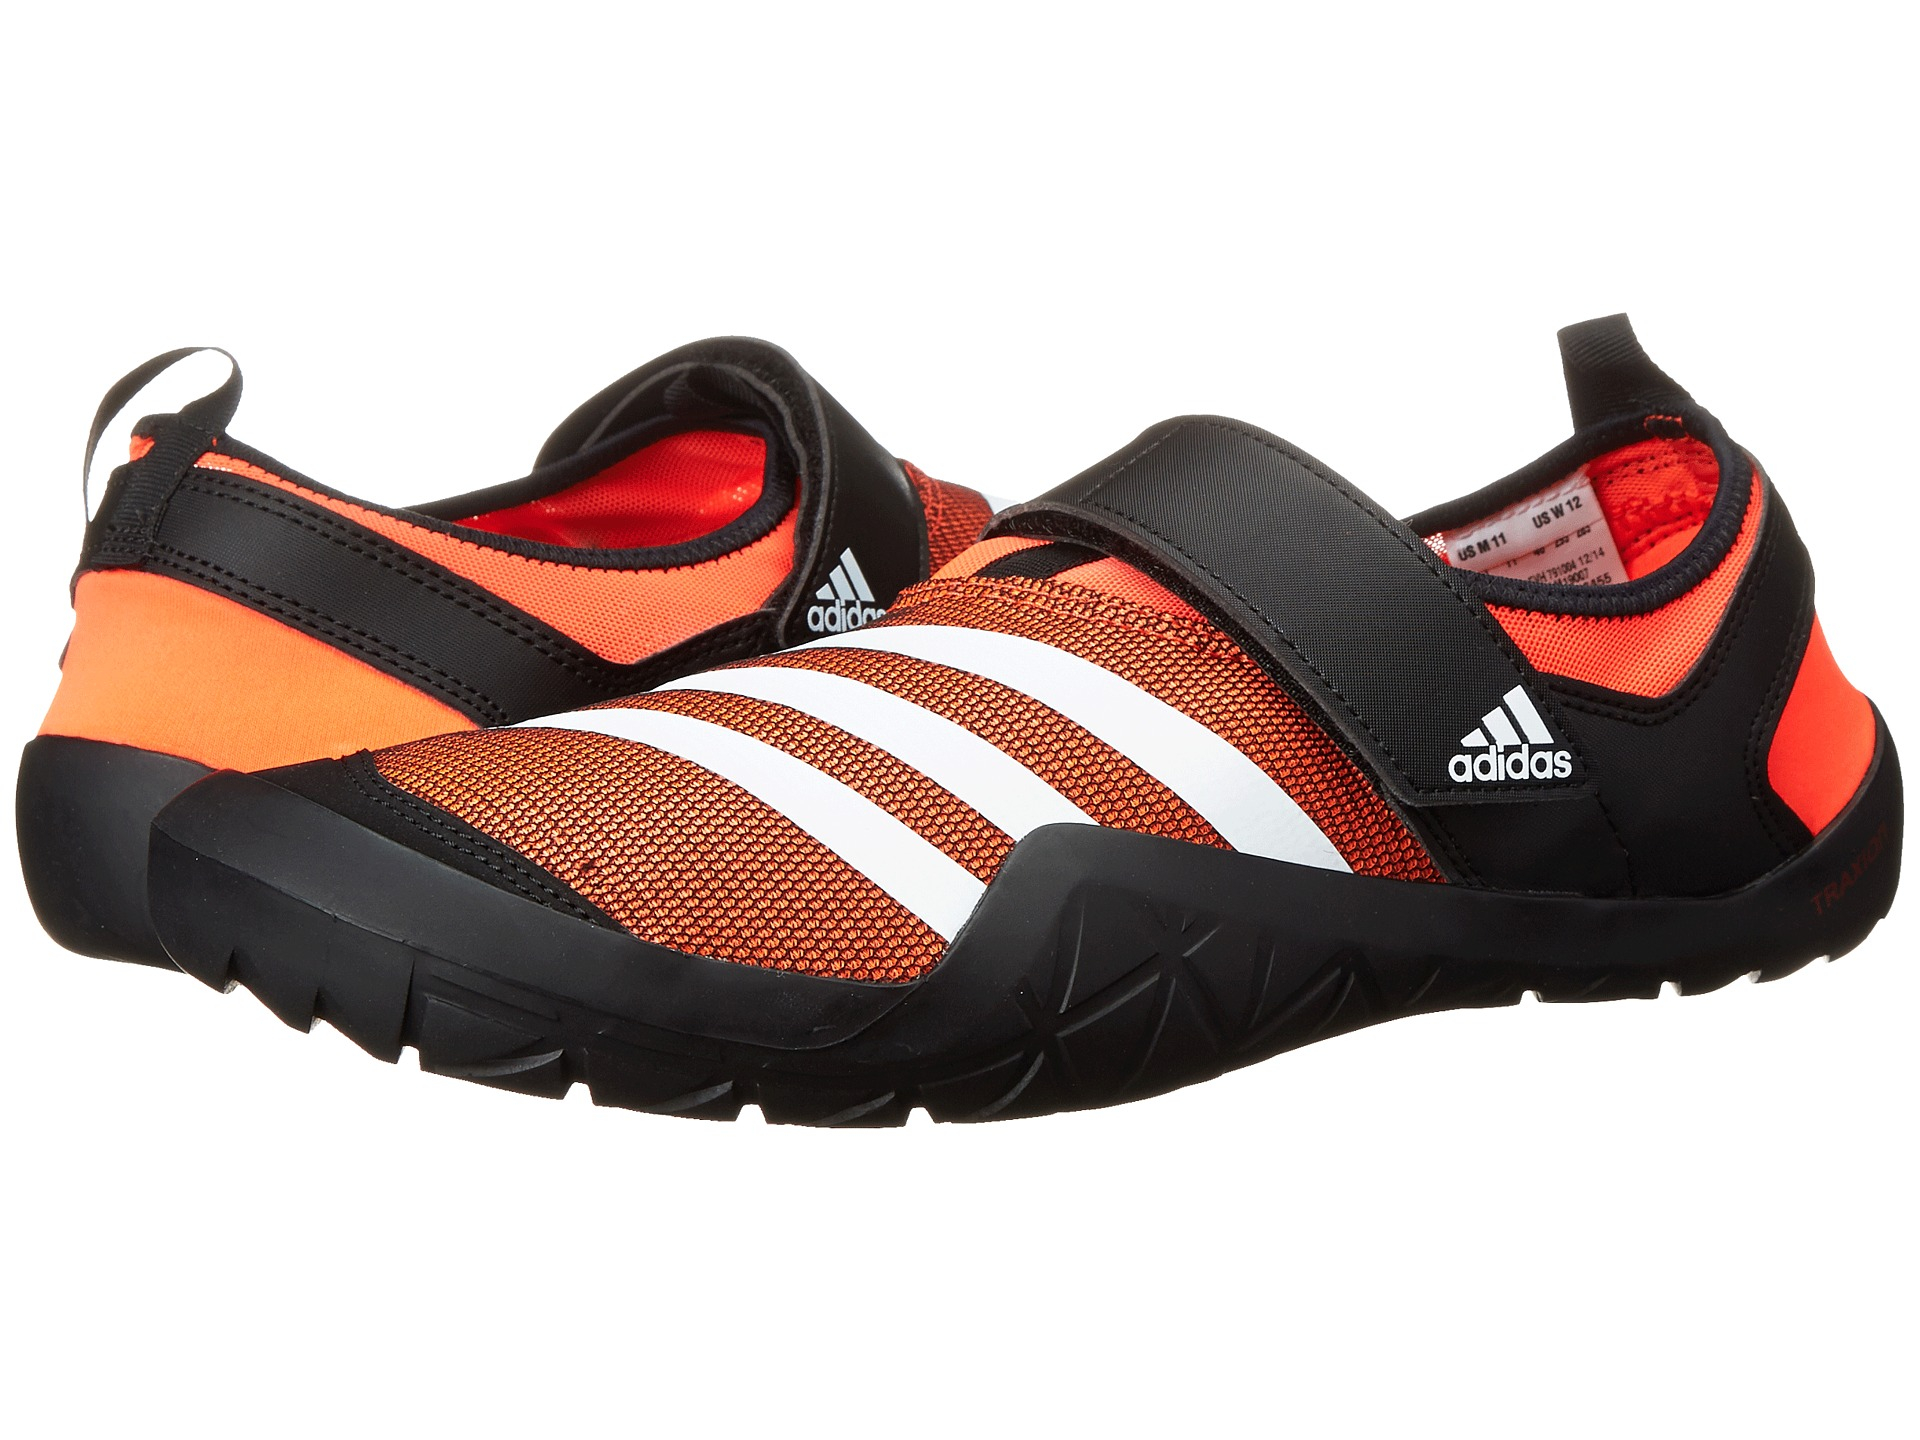 adidas Climacool® Jawpaw Cf in Red for Men - Lyst